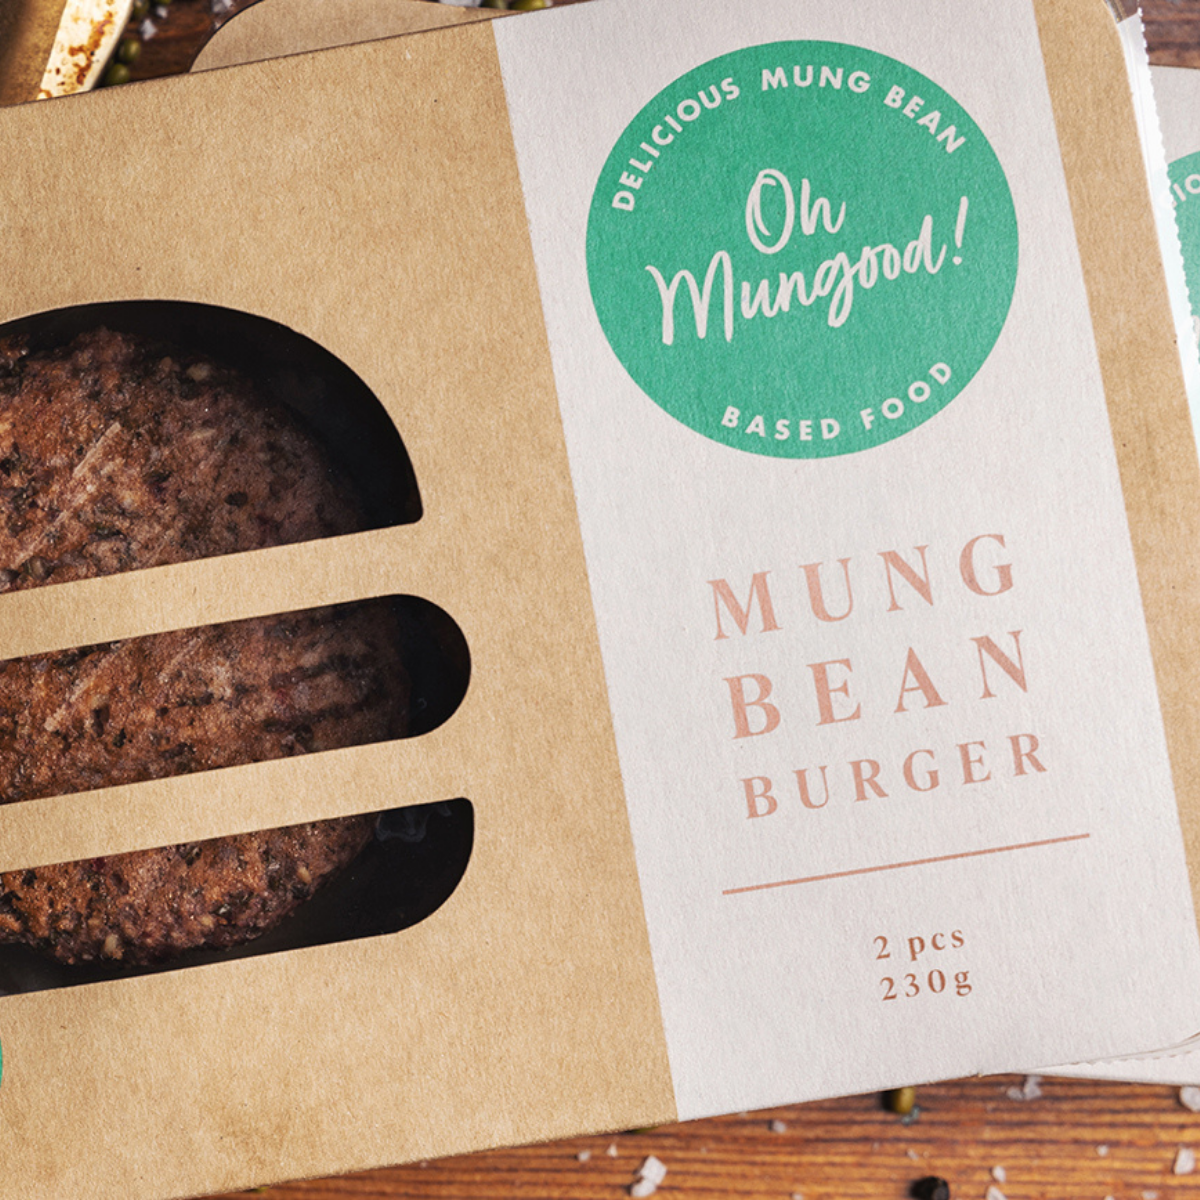 OMG Plantbased Food - Oh Mungood's Oh Mungoods-Mouth-Burger